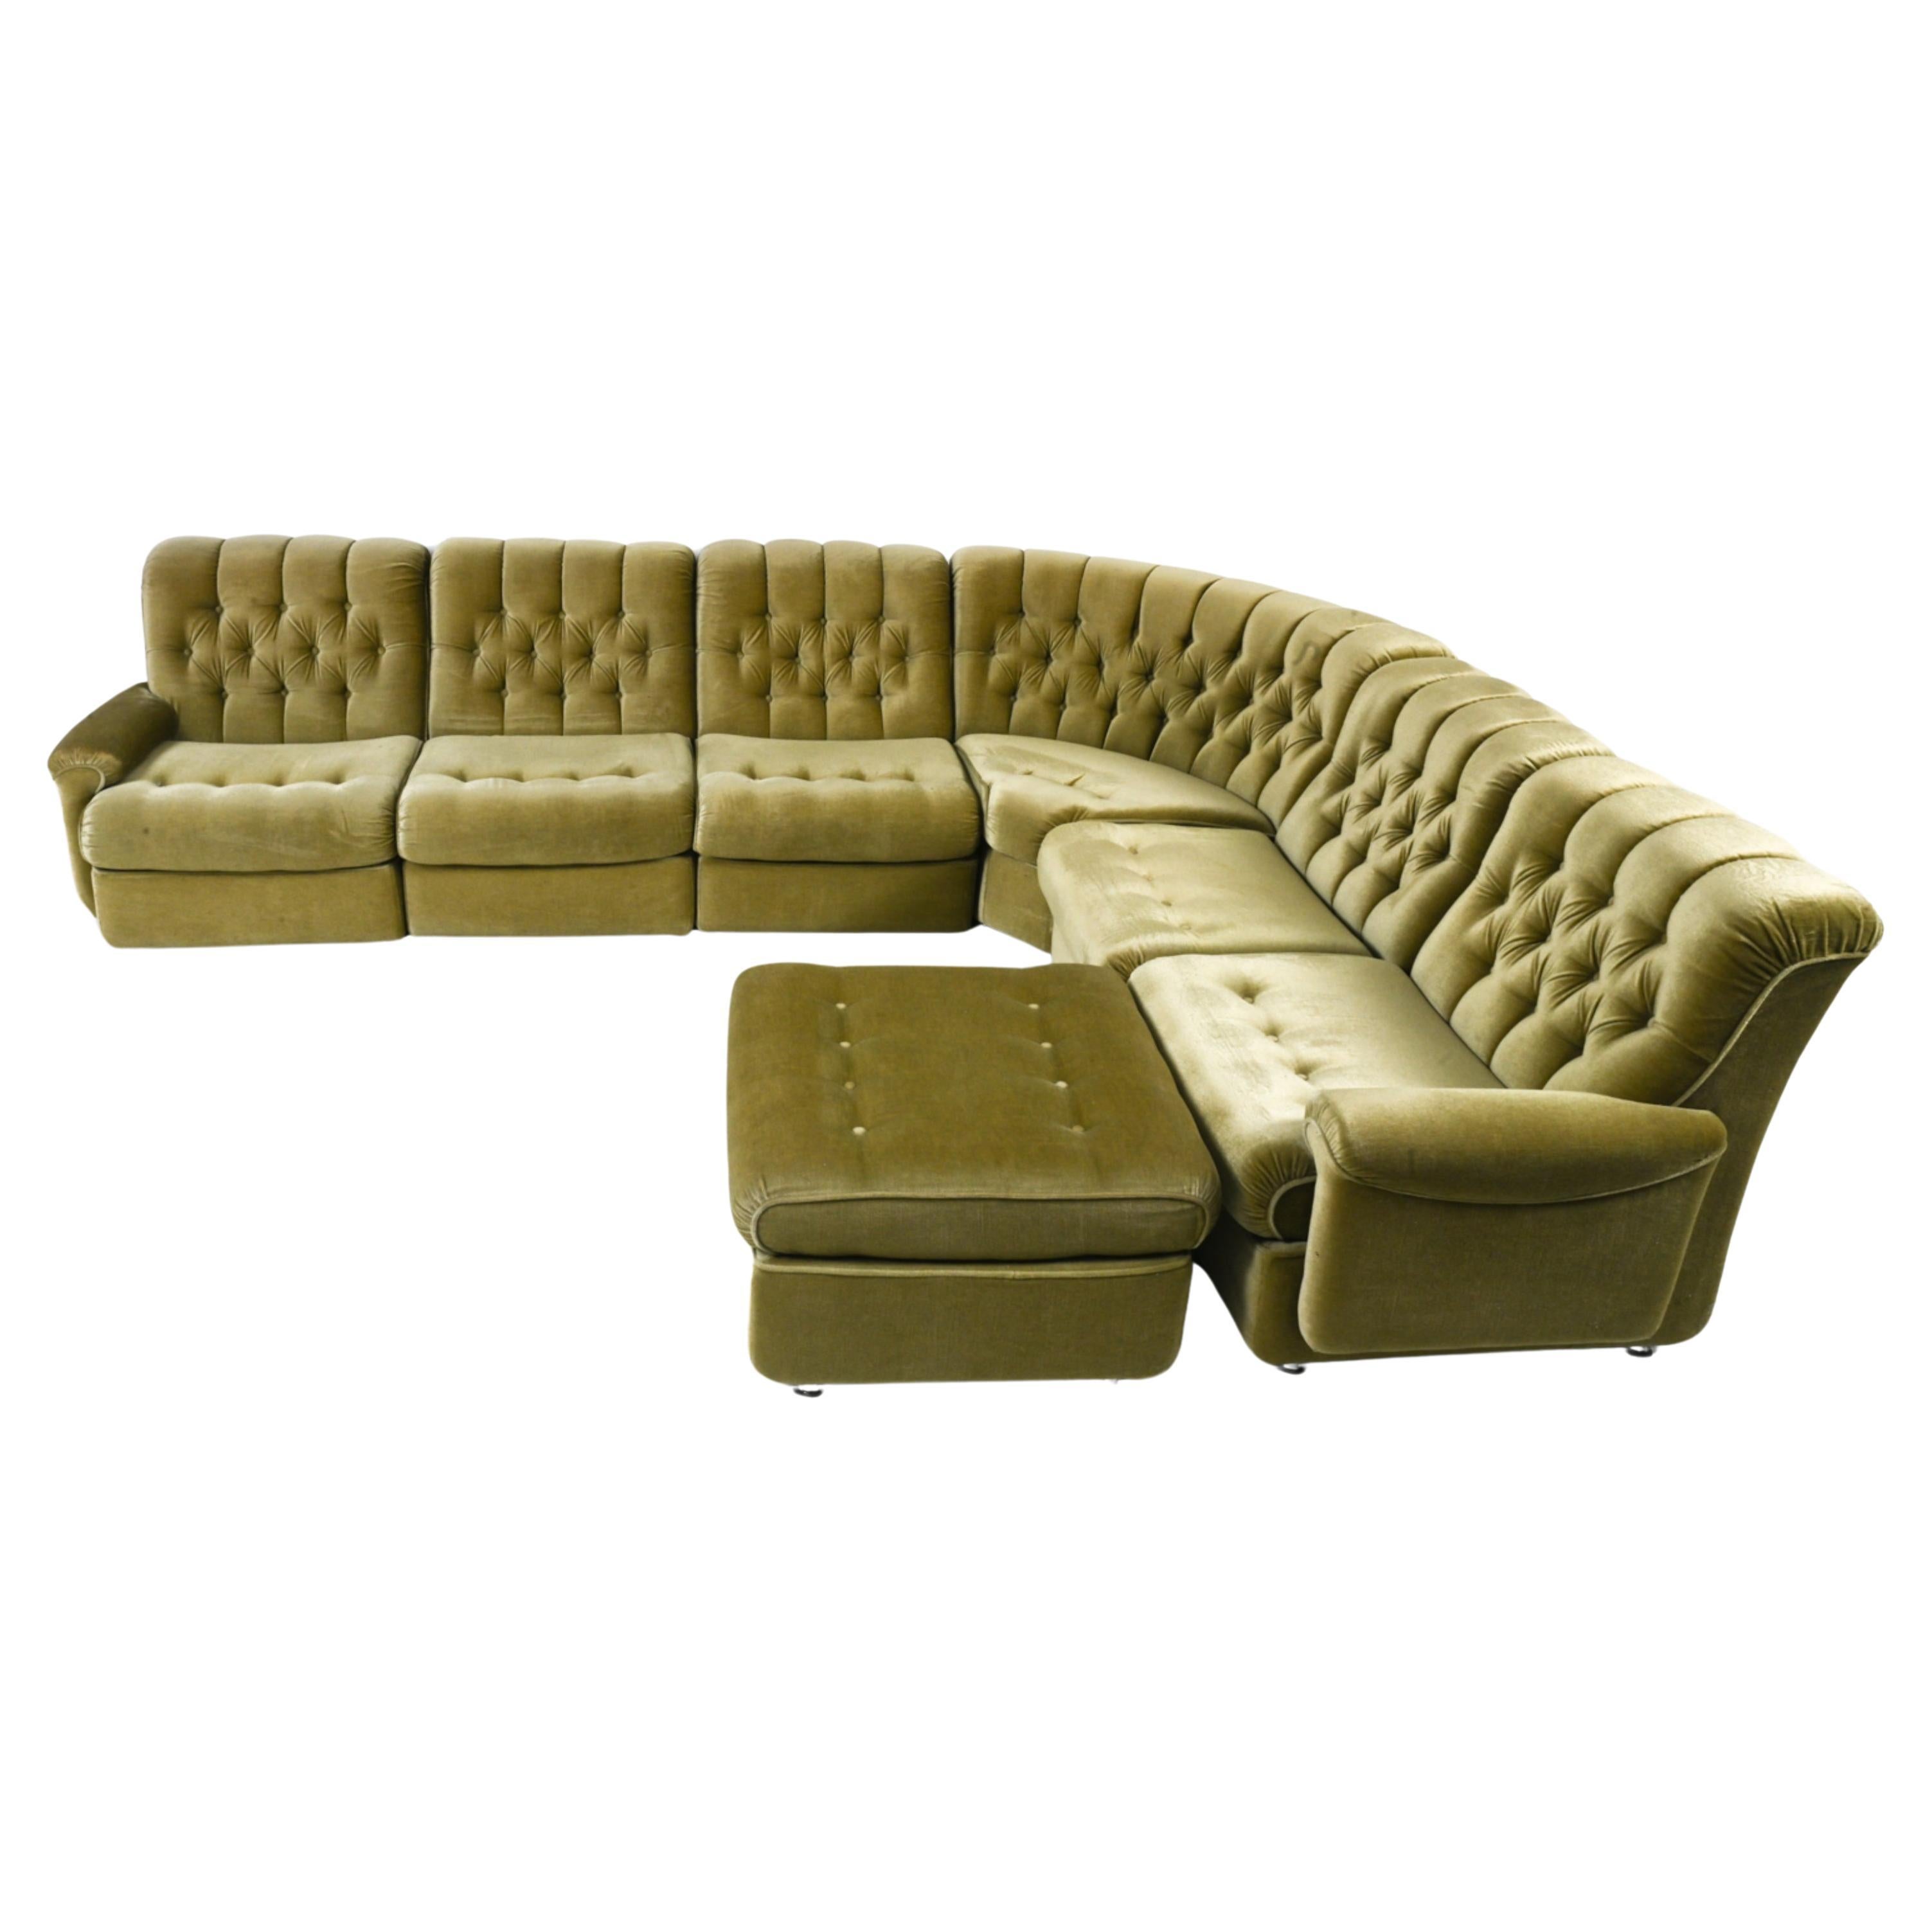 German Space Age Modular Sectional Sofa & Ottoman in Green Mohair, c. 1970's